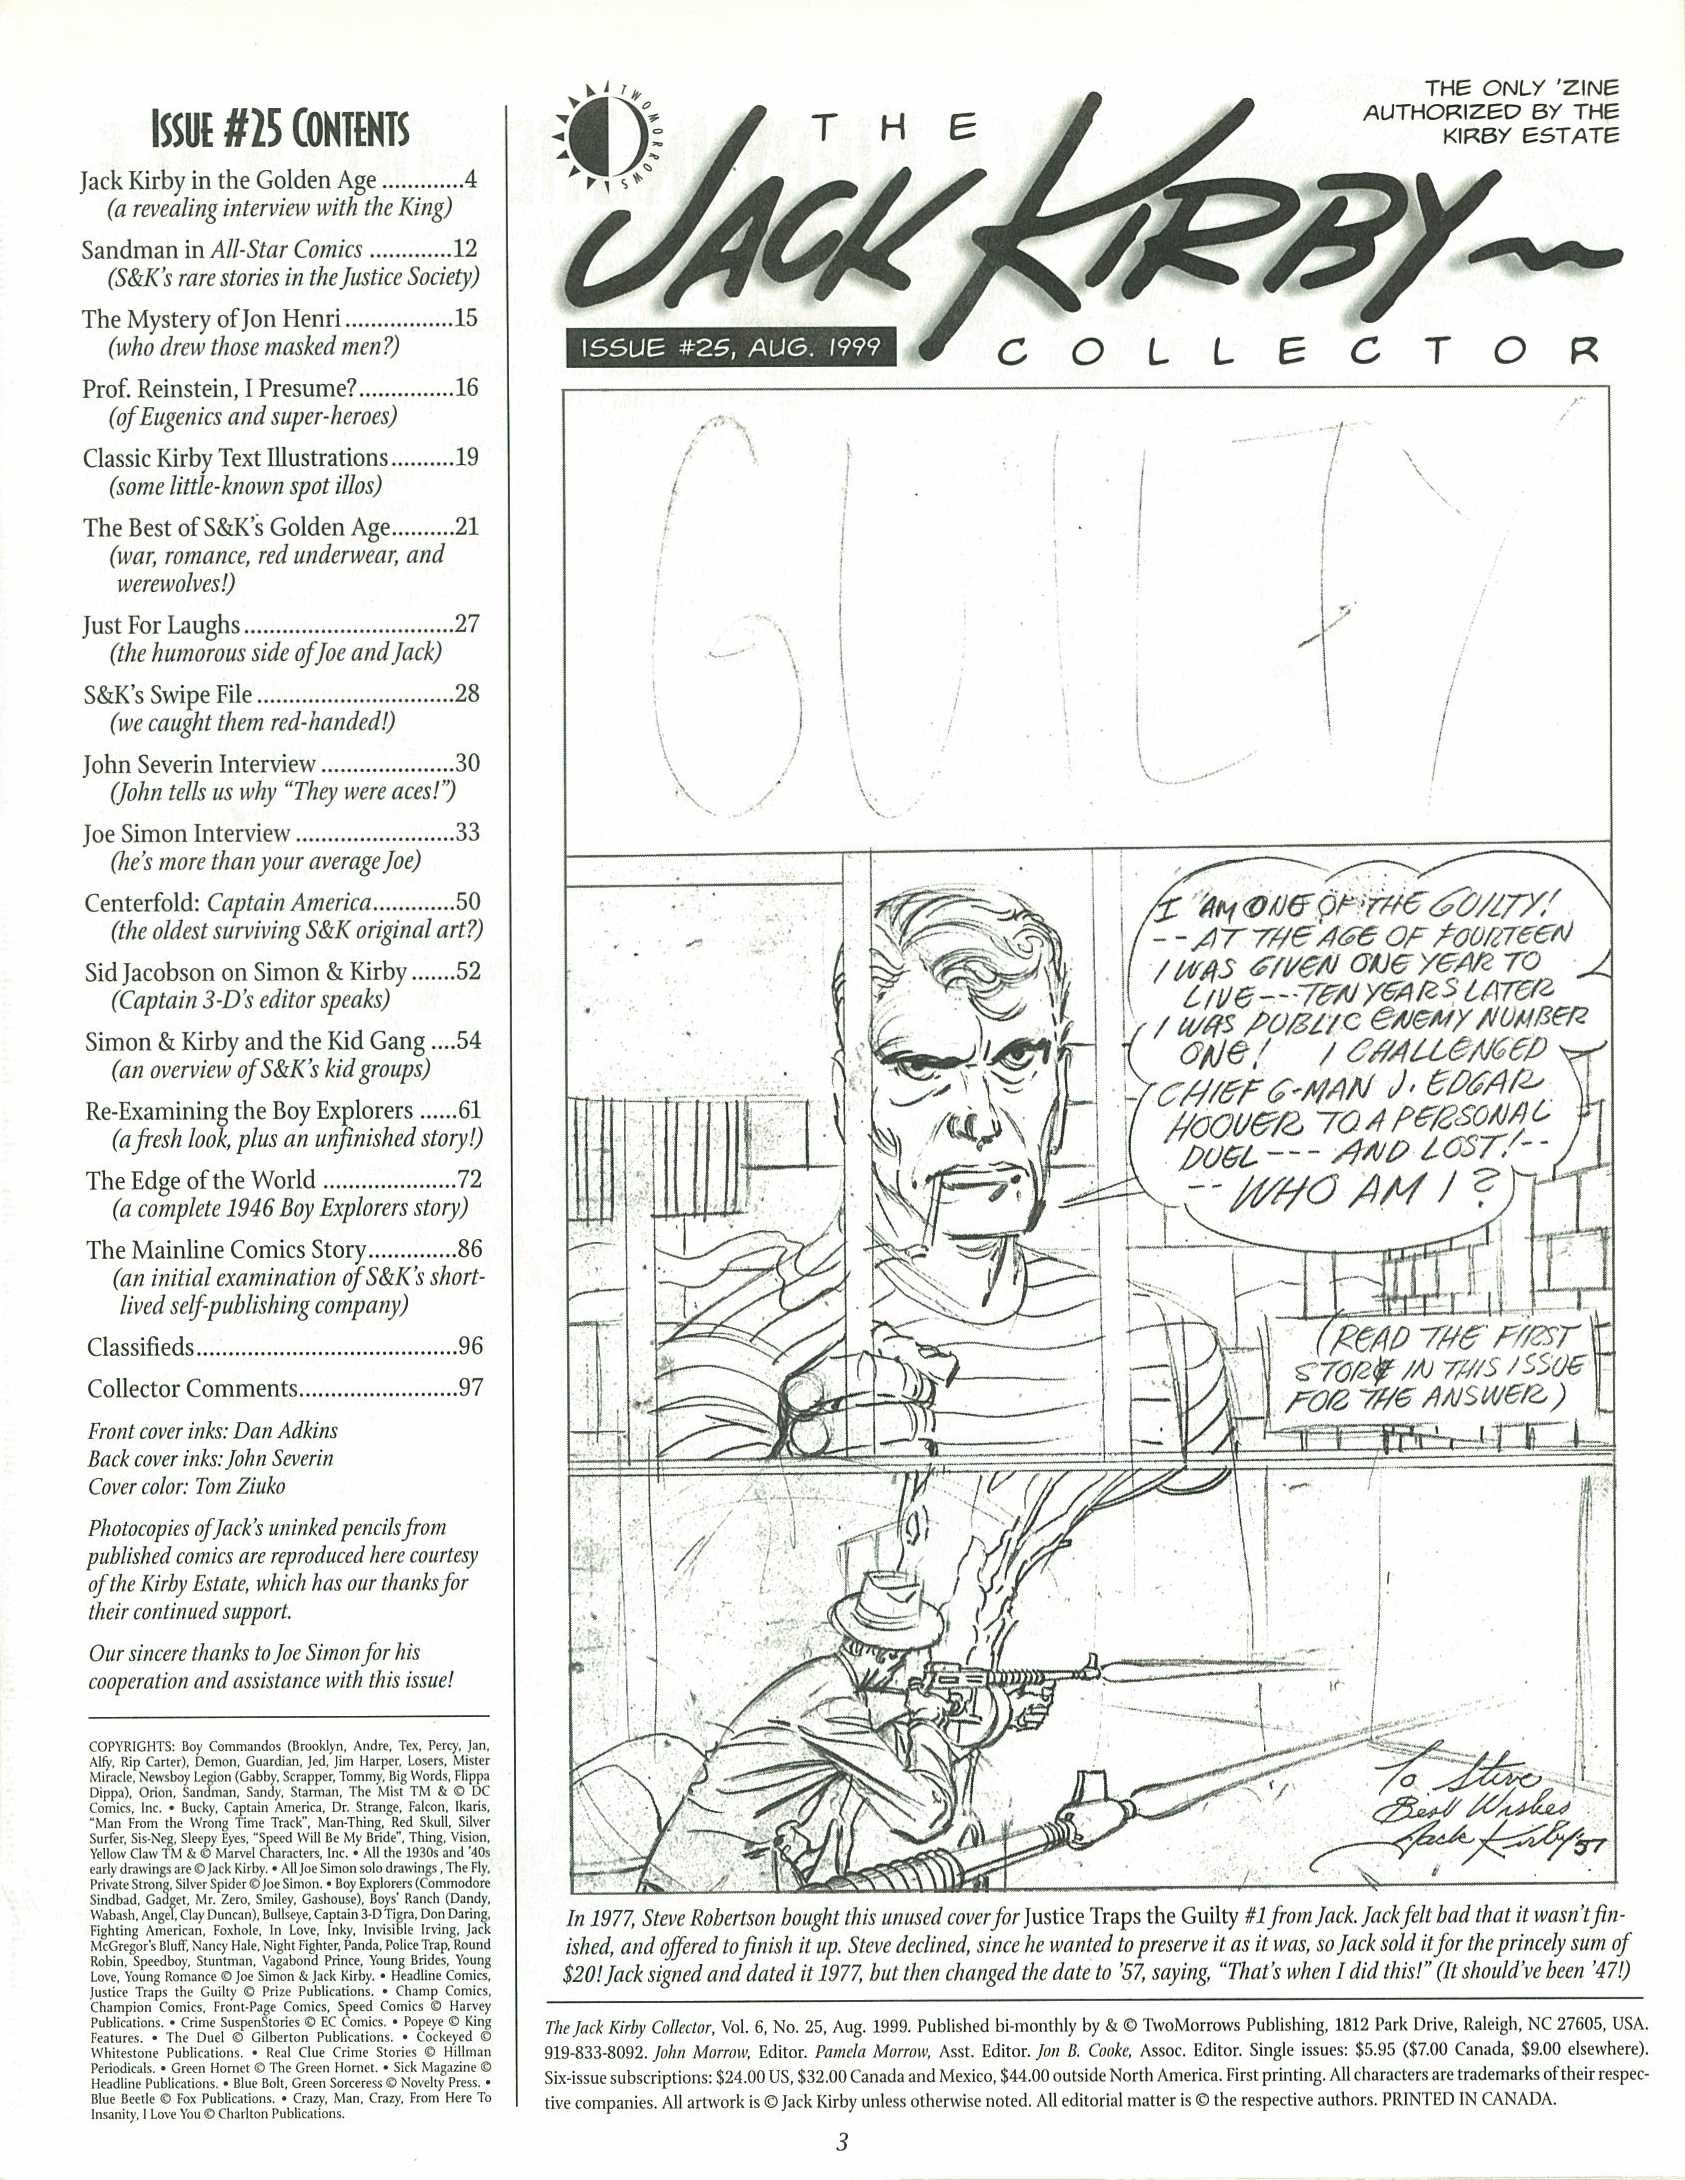 Read online The Jack Kirby Collector comic -  Issue #25 - 3